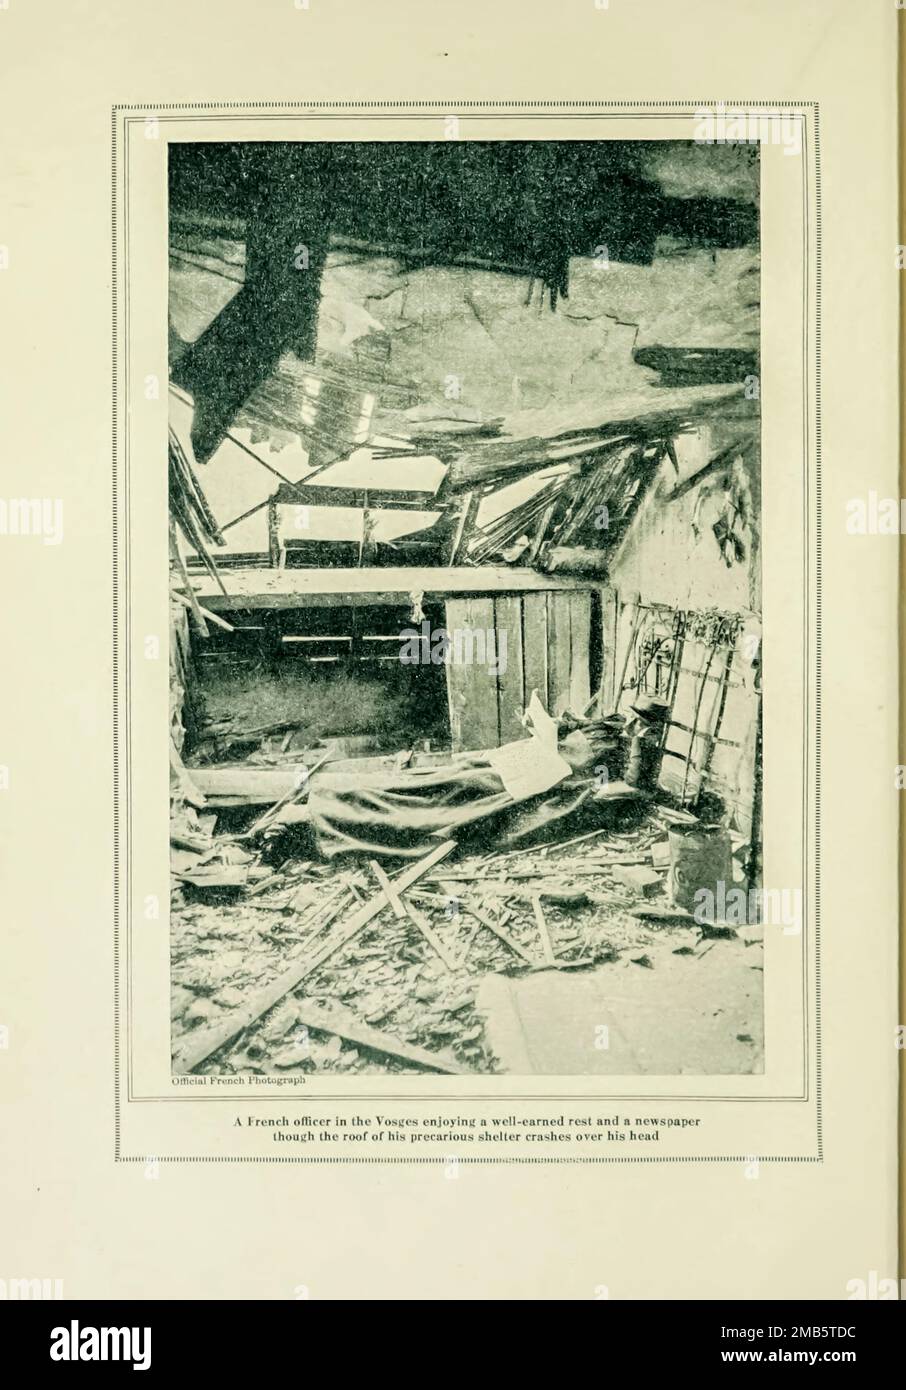 French Officer in a Shattered House in the Vosges from the book The story of the great war; the complete historical records of events to date DIPLOMATIC AND STATE PAPERS by Reynolds, Francis Joseph, 1867-1937; Churchill, Allen Leon; Miller, Francis Trevelyan, 1877-1959; Wood, Leonard, 1860-1927; Knight, Austin Melvin, 1854-1927; Palmer, Frederick, 1873-1958; Simonds, Frank Herbert, 1878-; Ruhl, Arthur Brown, 1876-  Volume VII Published 1920 Stock Photo